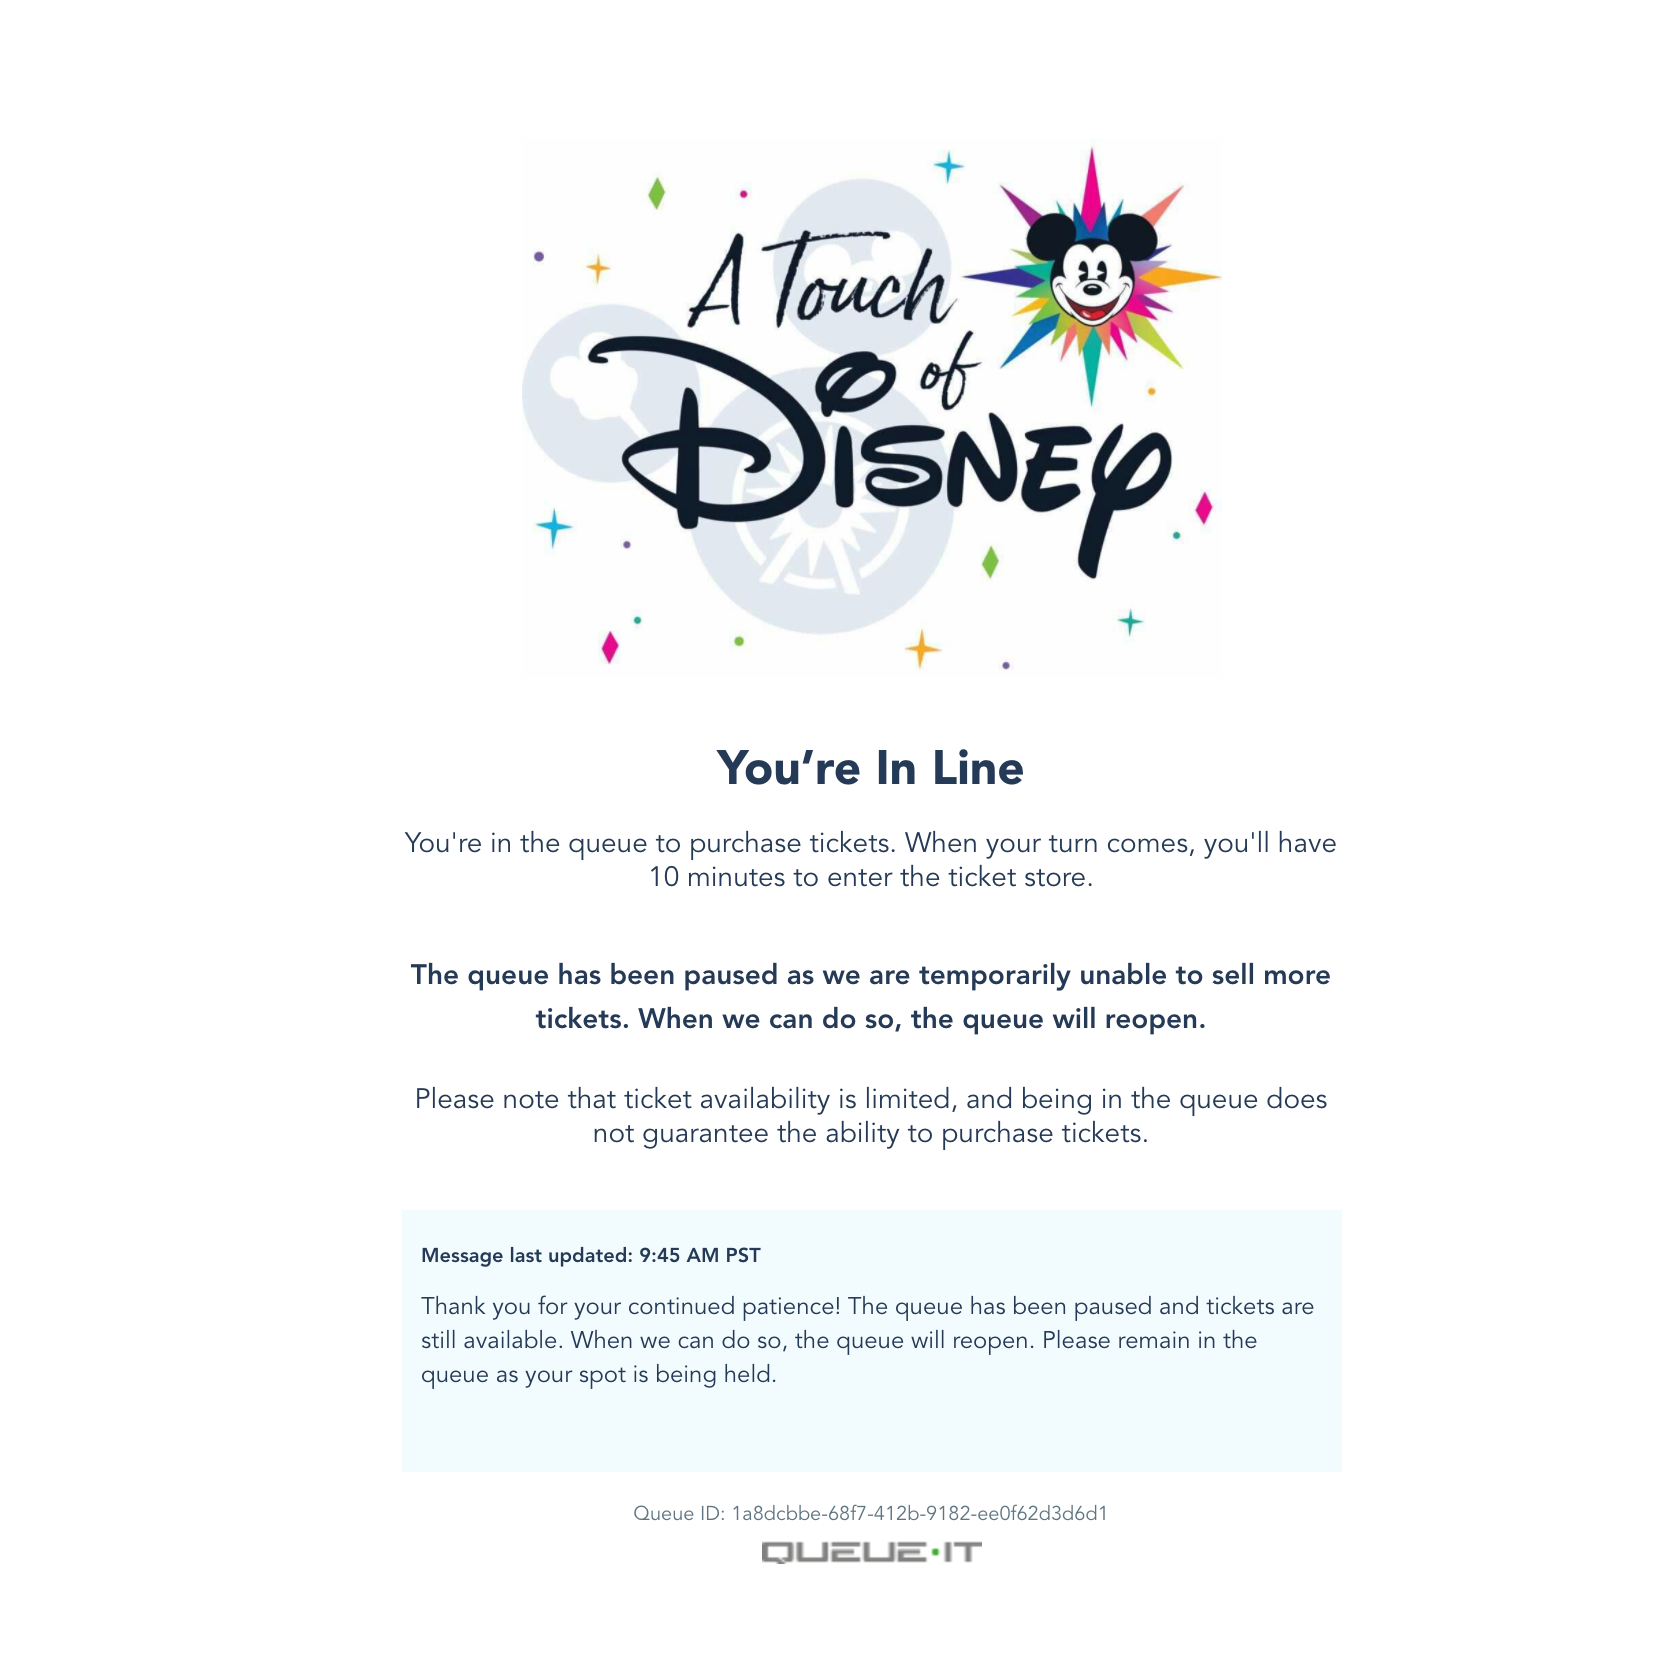 Tickets for A Touch of Disney Experience at Disney's California Adventure Now Available